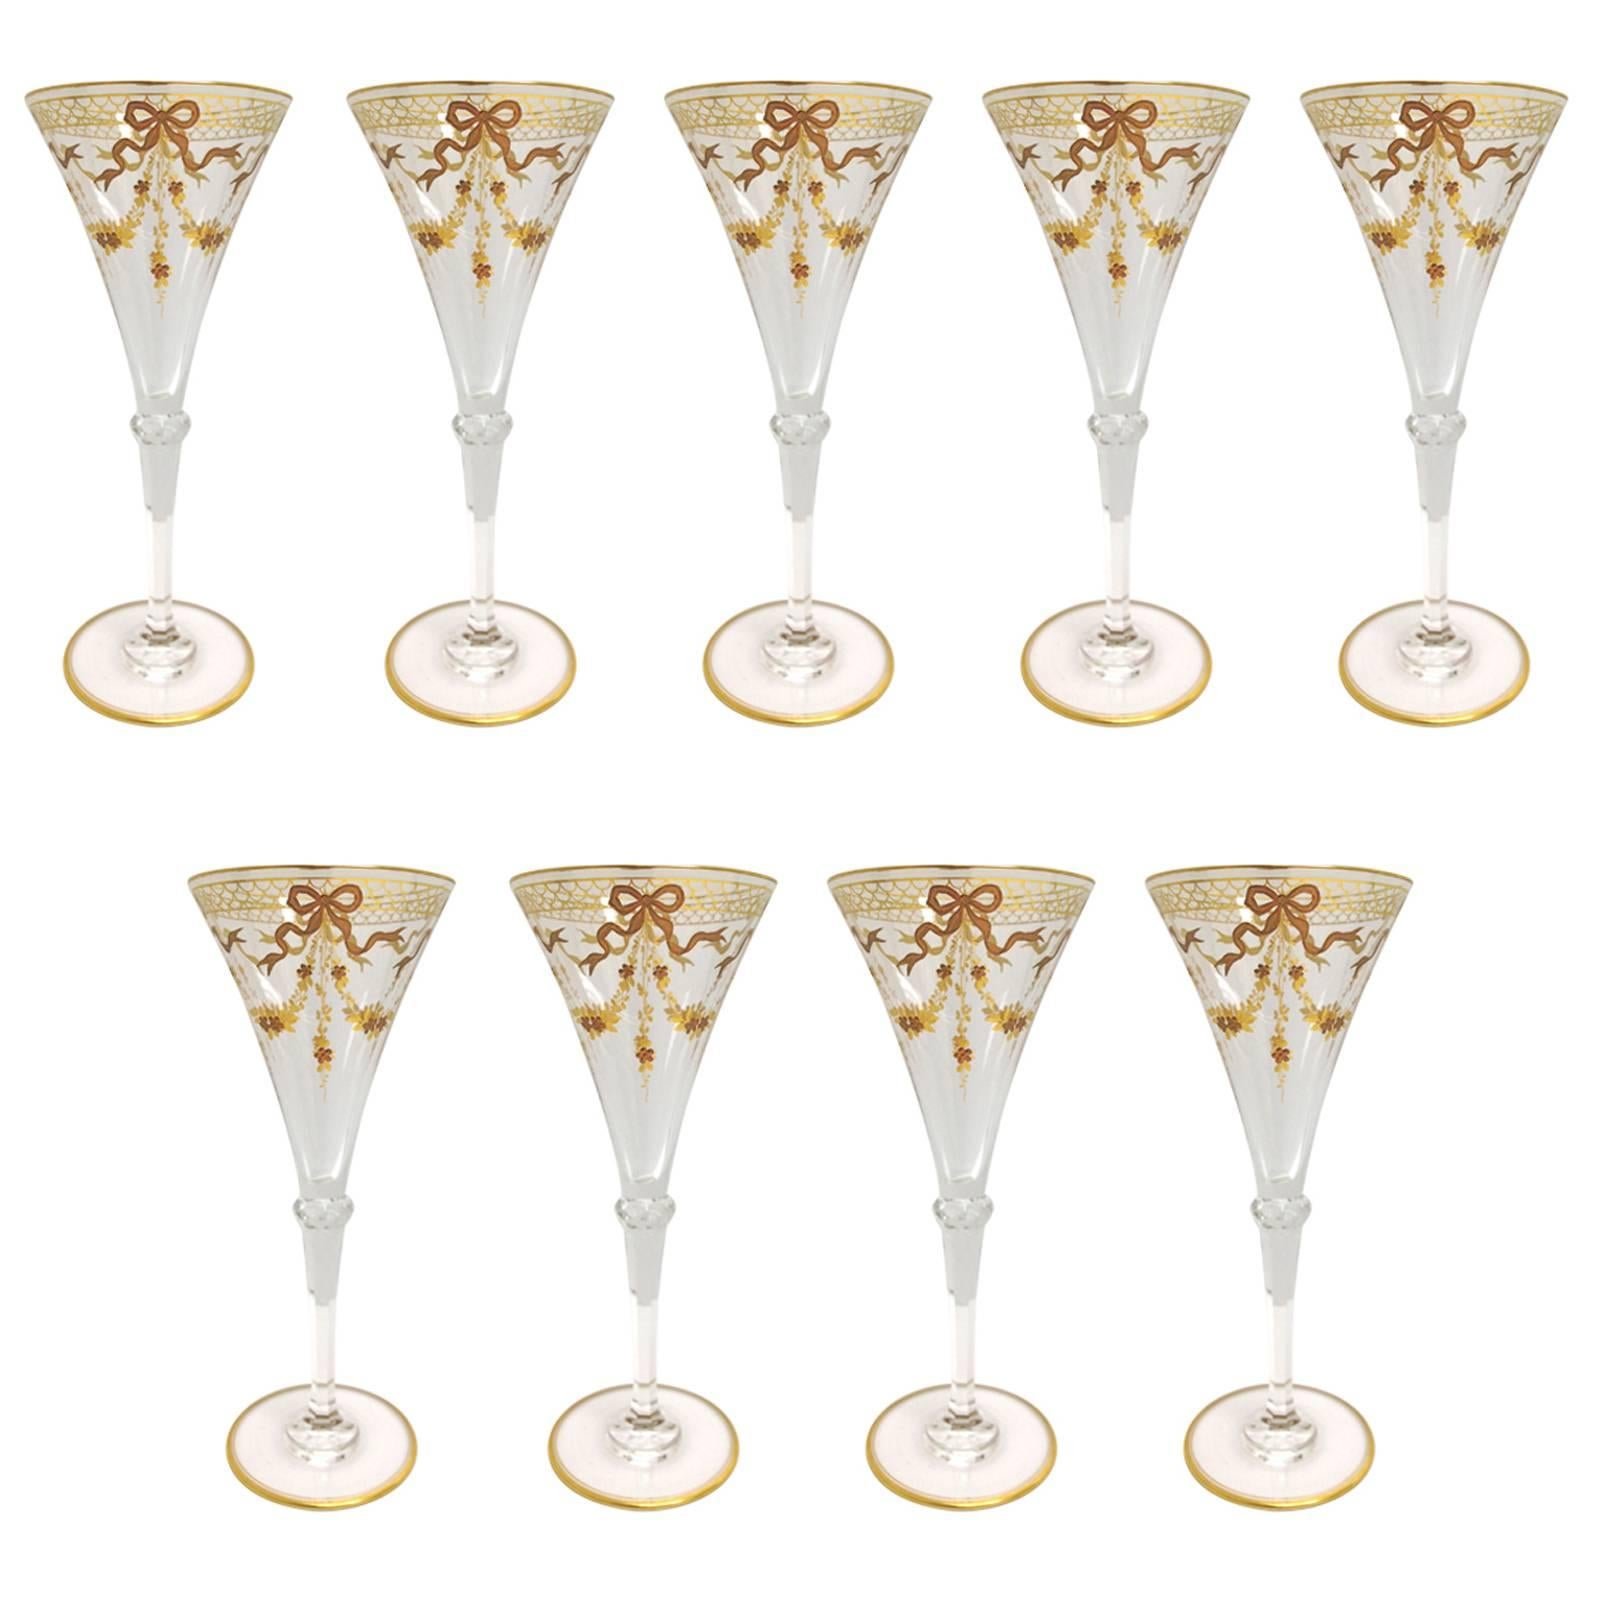 Nine Rare Moser Glass Campagne Flutes Richly Gilded in Two Tones, circa 1900